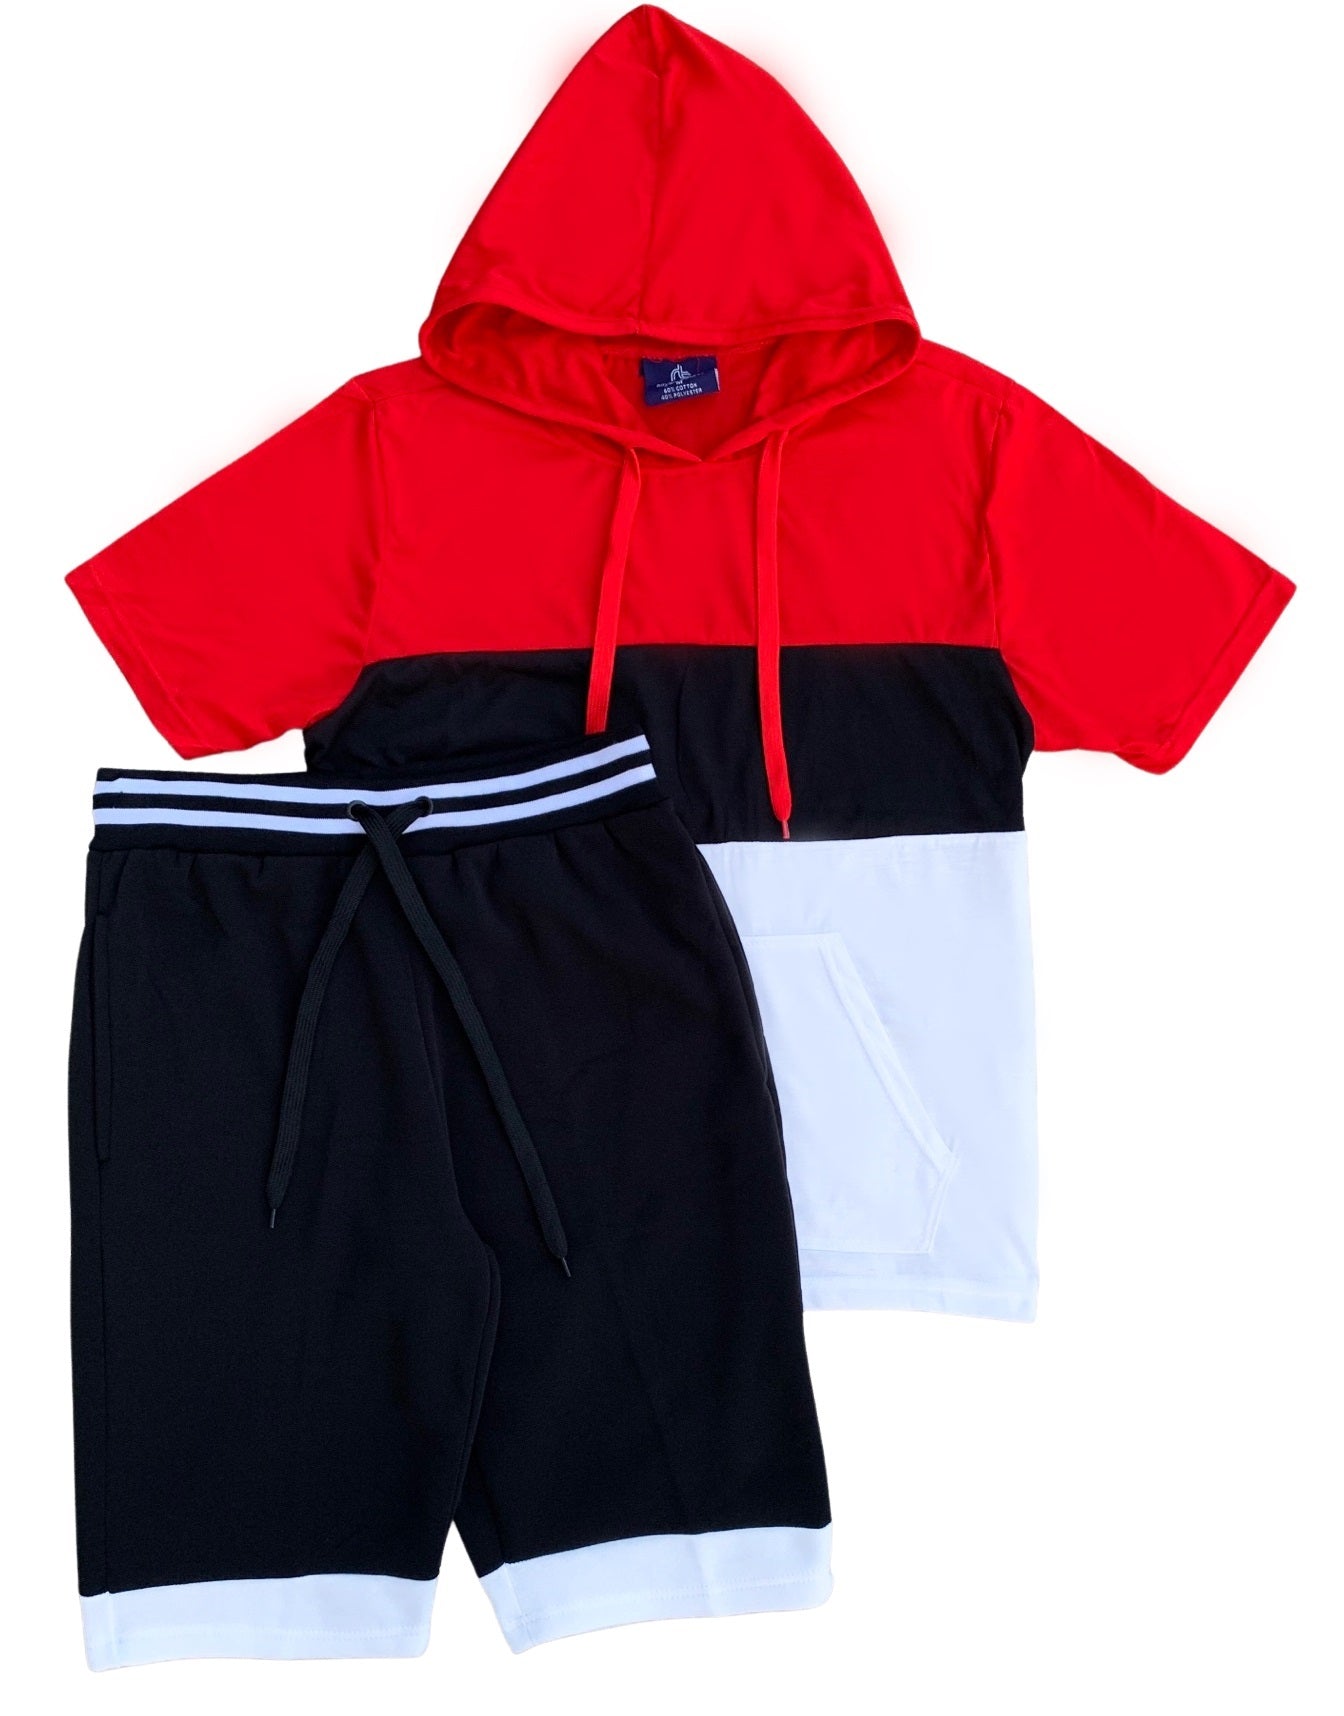 Royal Threads Canada Men’s 2-piece Color block Short Set pullover Hoodie with matching shorts